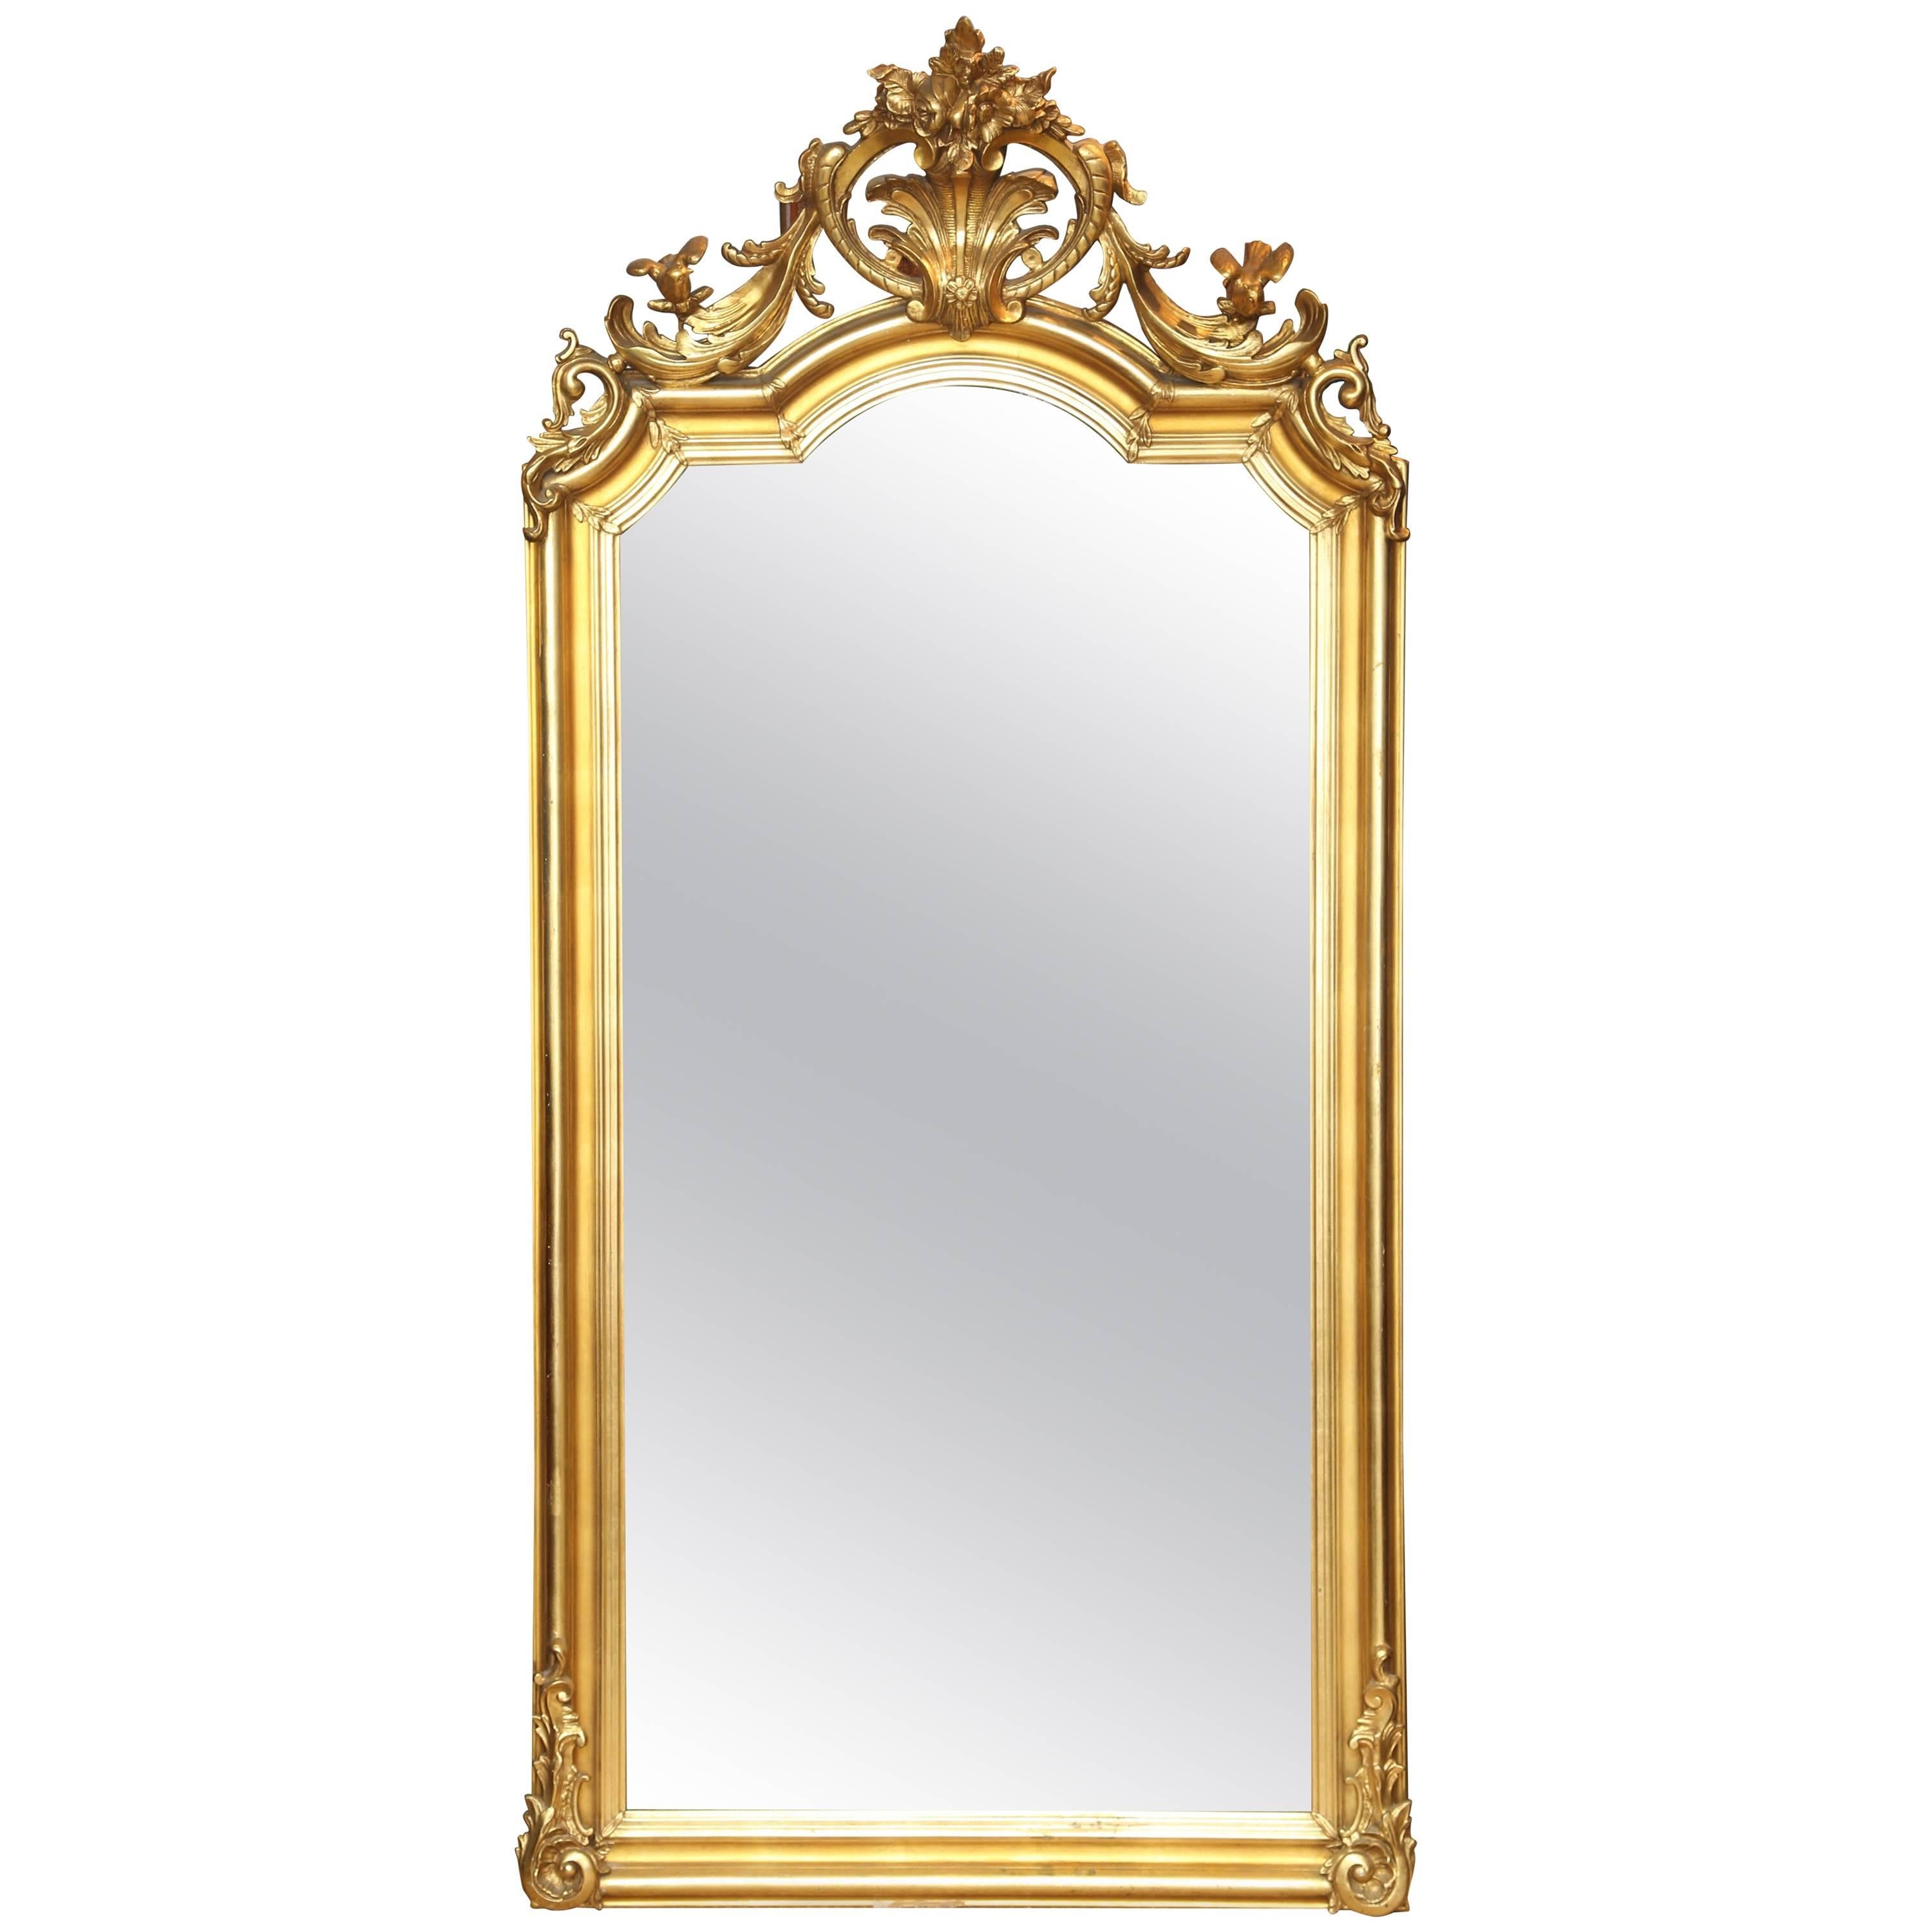 Superb French, 19th Century Giltwood Mirror